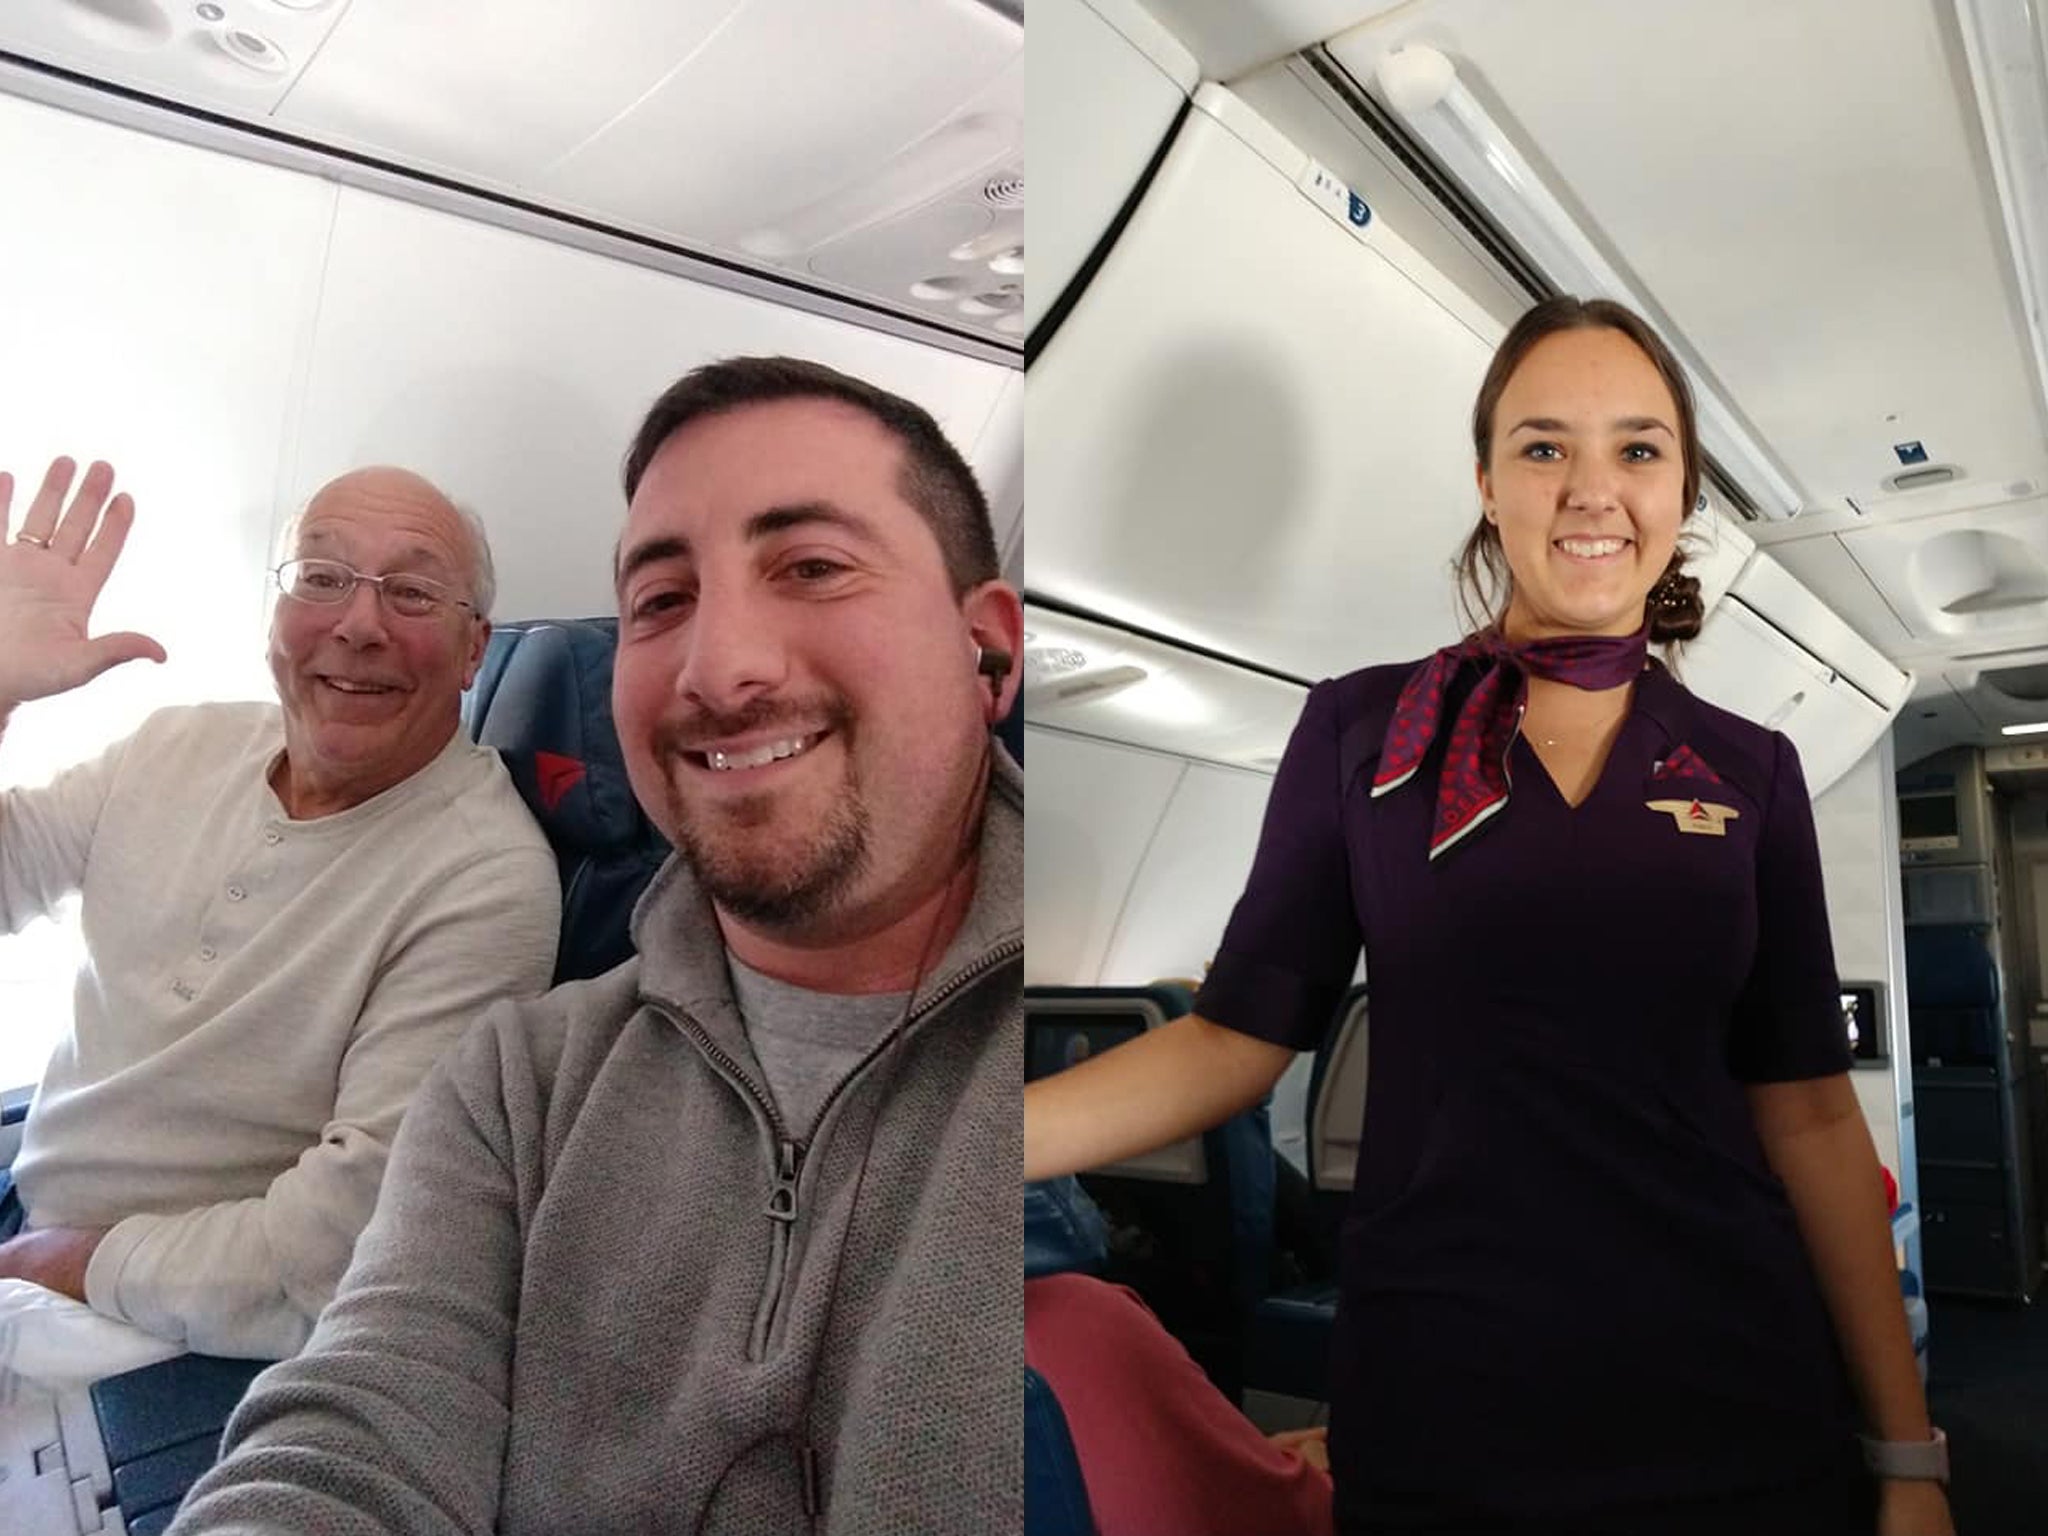 Hal Vaughn flew on his daughter's flights over Christmas so she wouldn't have to spend it alone (Credit: Mike Levy)